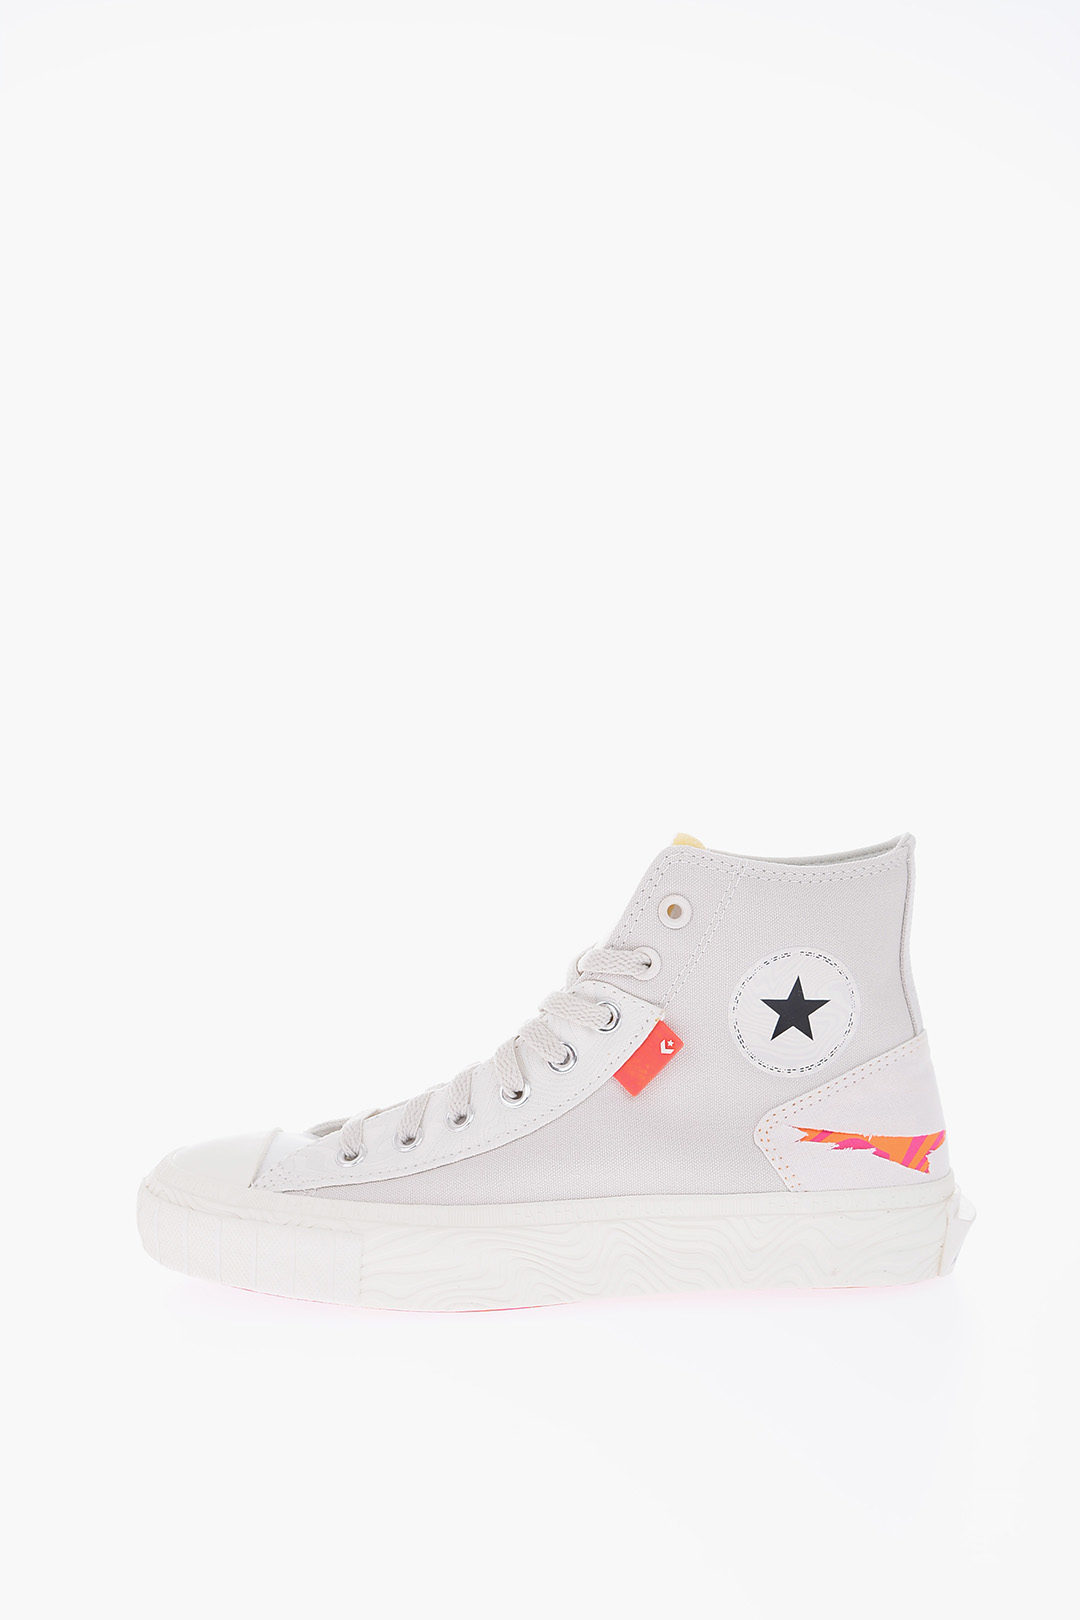 Thriller means Become aware Converse ALL STAR CHUCK TAYLOR Padded High-Top Sneakers men - Glamood Outlet